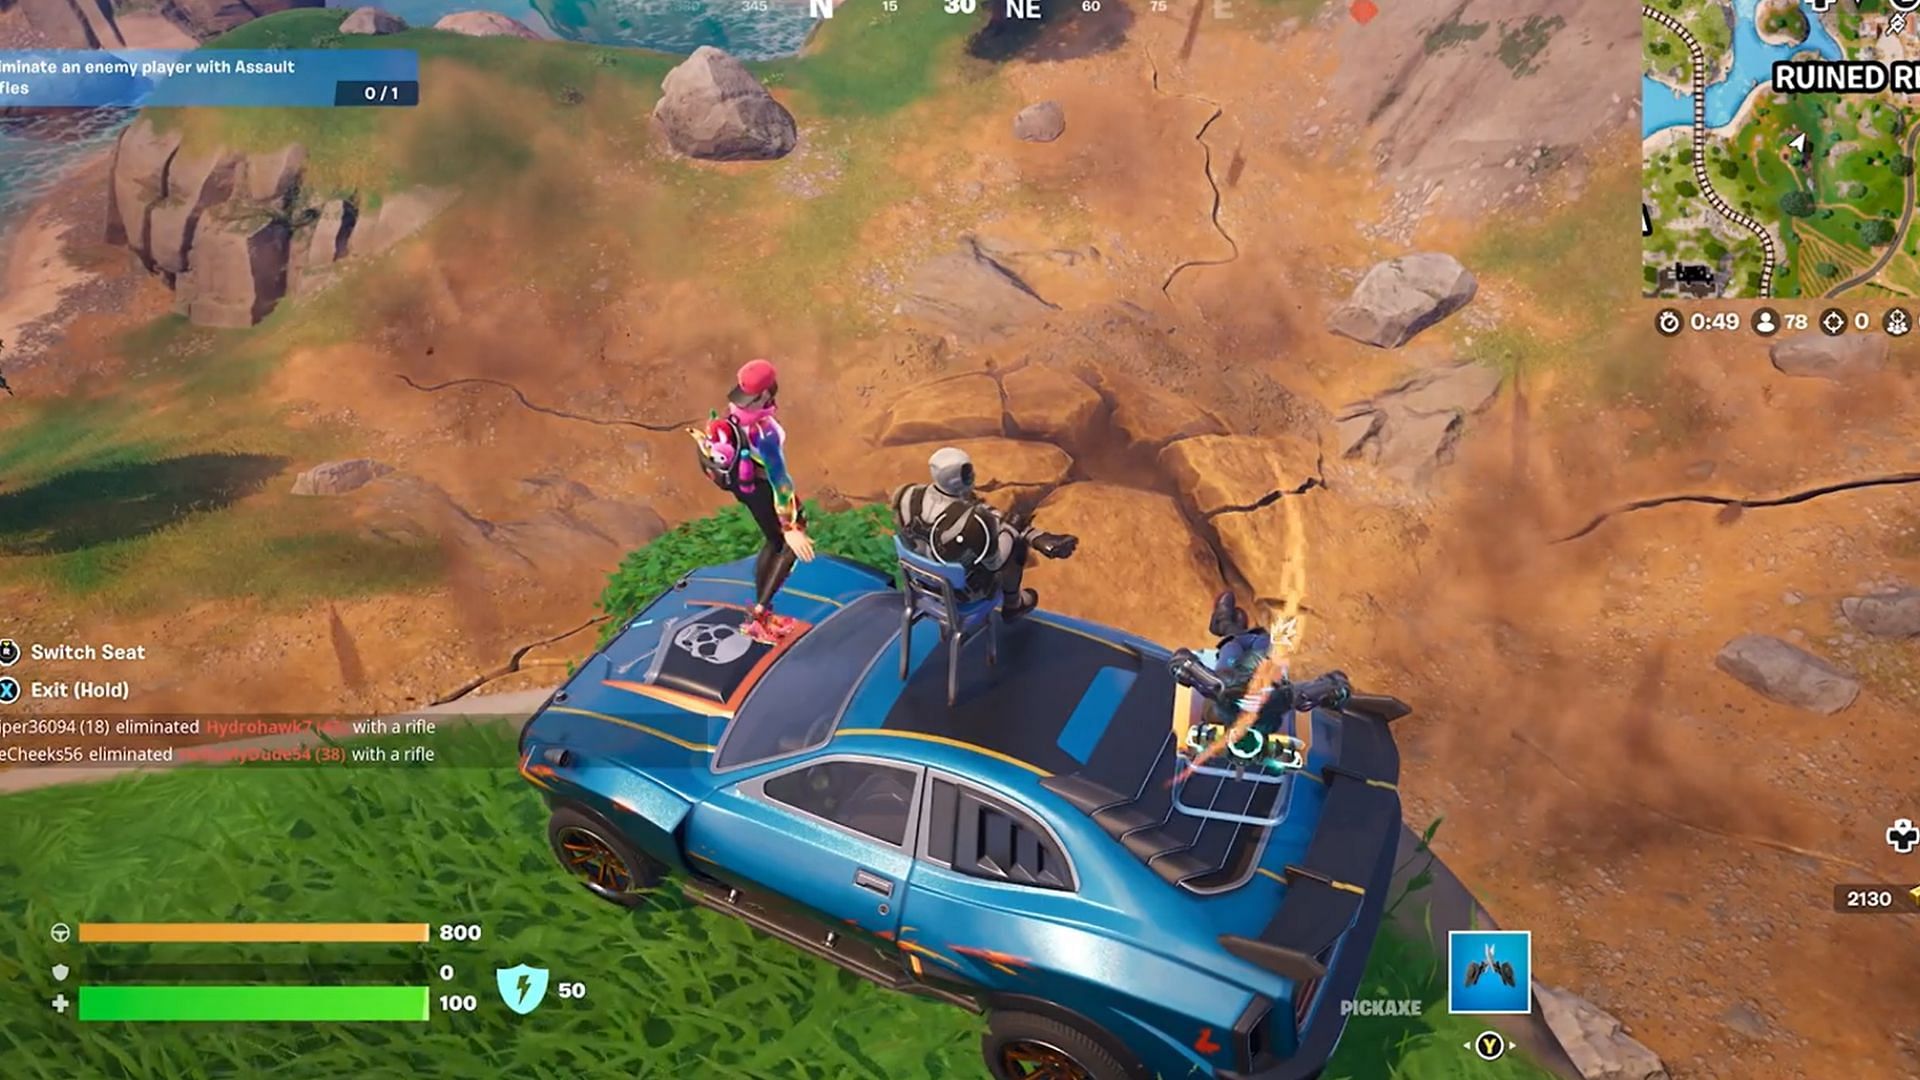 Fortnite mini-event brings the community together, opponents declare cease-fire to witness earthquakes